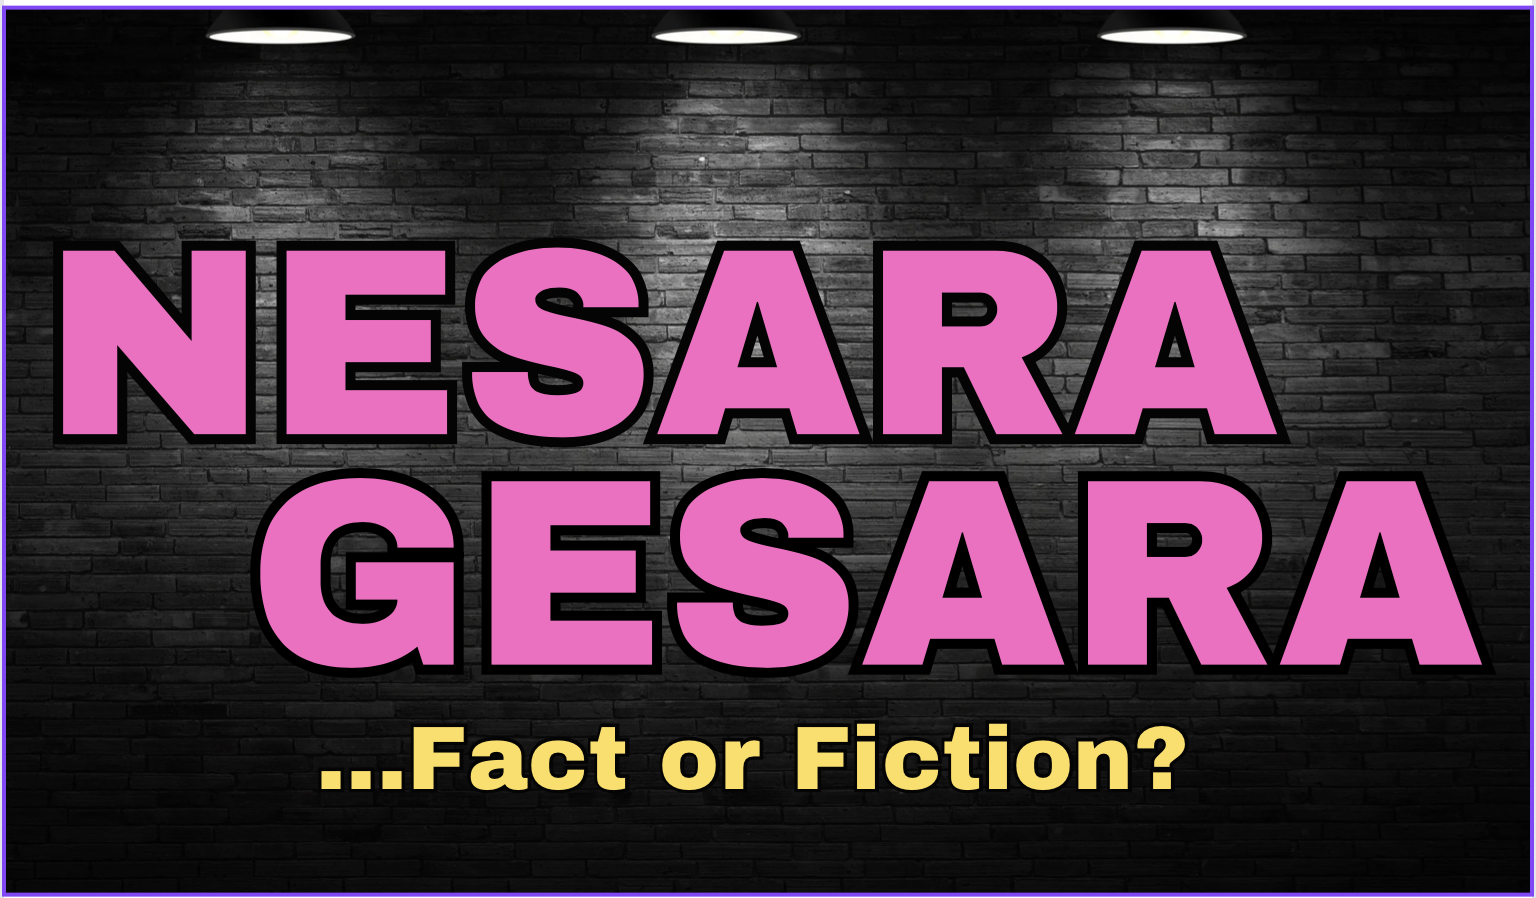 The Harsh Truth About NESARA and GESARA